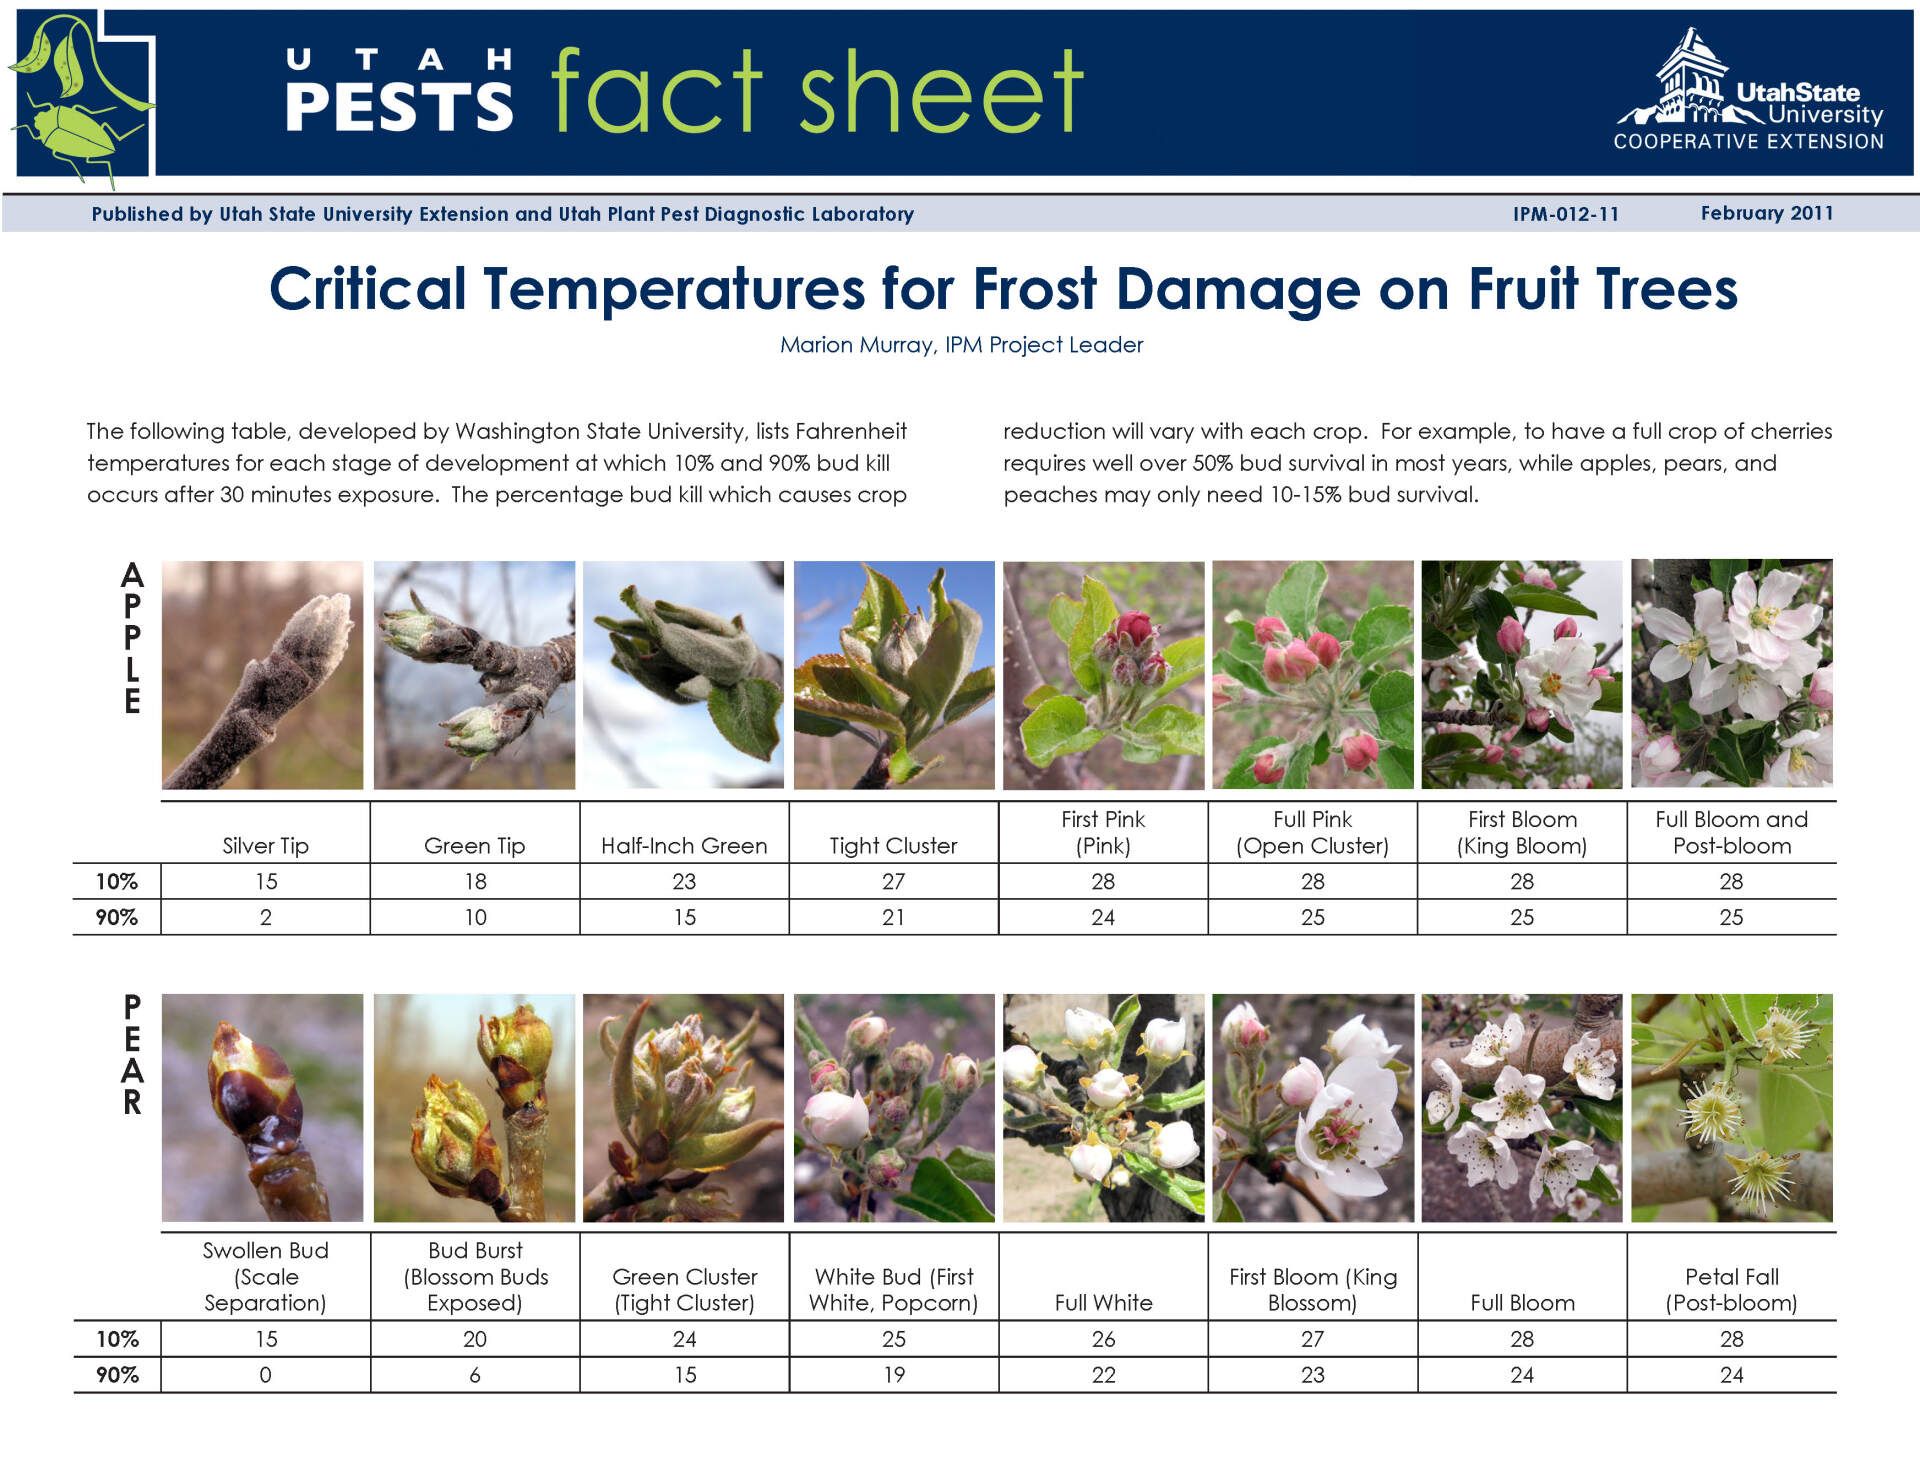 a fact sheet about critical temperatures for frost damage on fruit trees